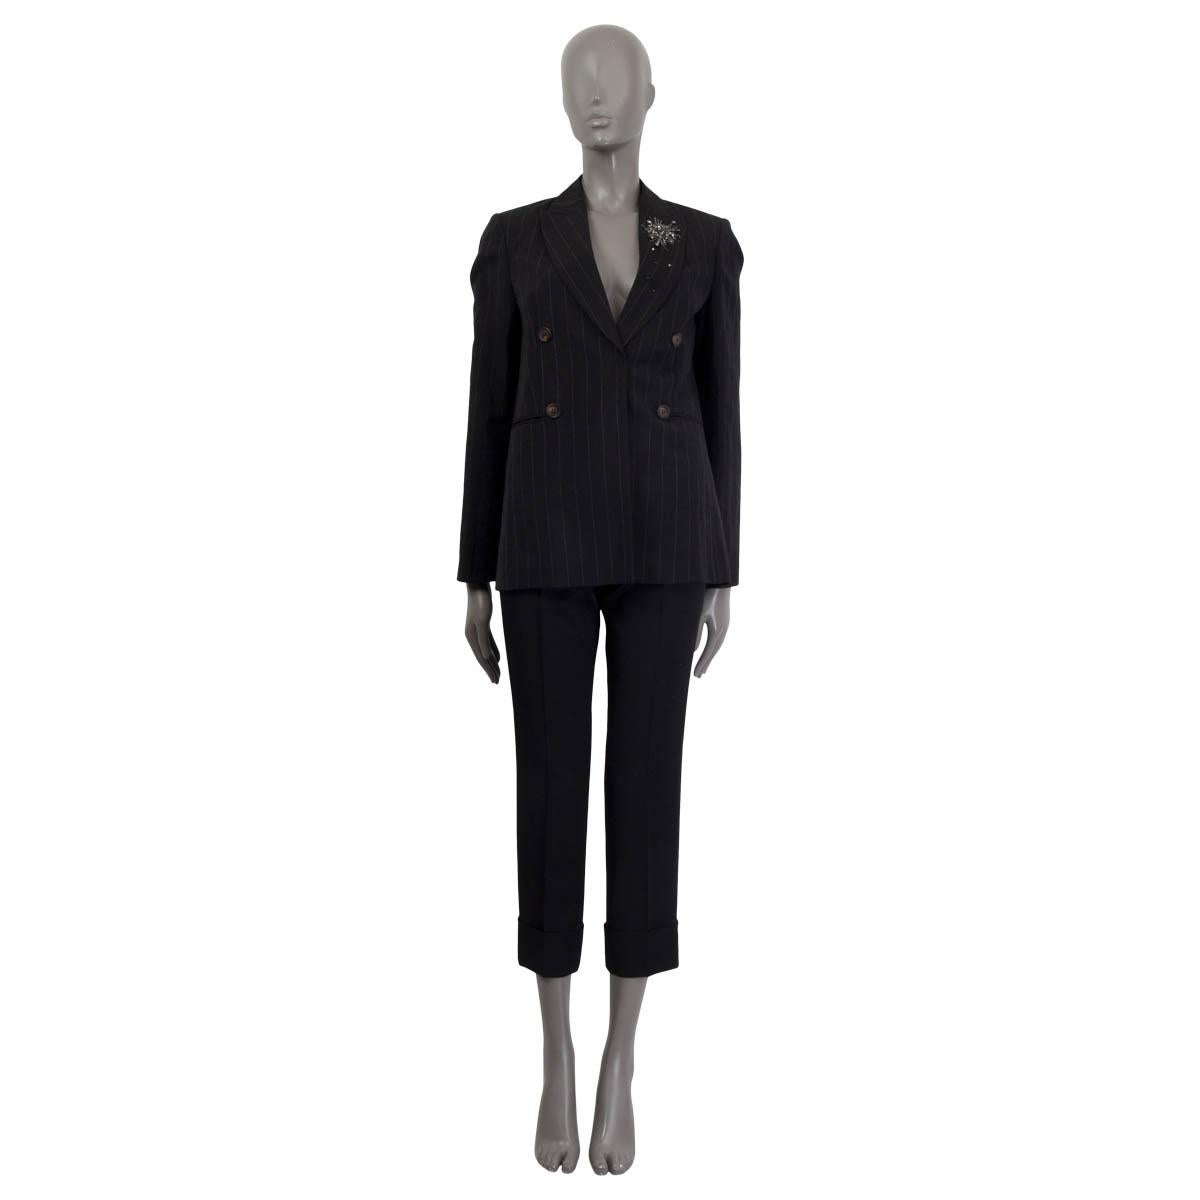 100% authentic Brunello Cucinelli pin-stripe blazer in black a gray virgin wool (54%) and linen (46%). Features Swarovski crystal embellishments on the collar and two sewn shut slit pockets on the front. Opens with two push buttons on the front.